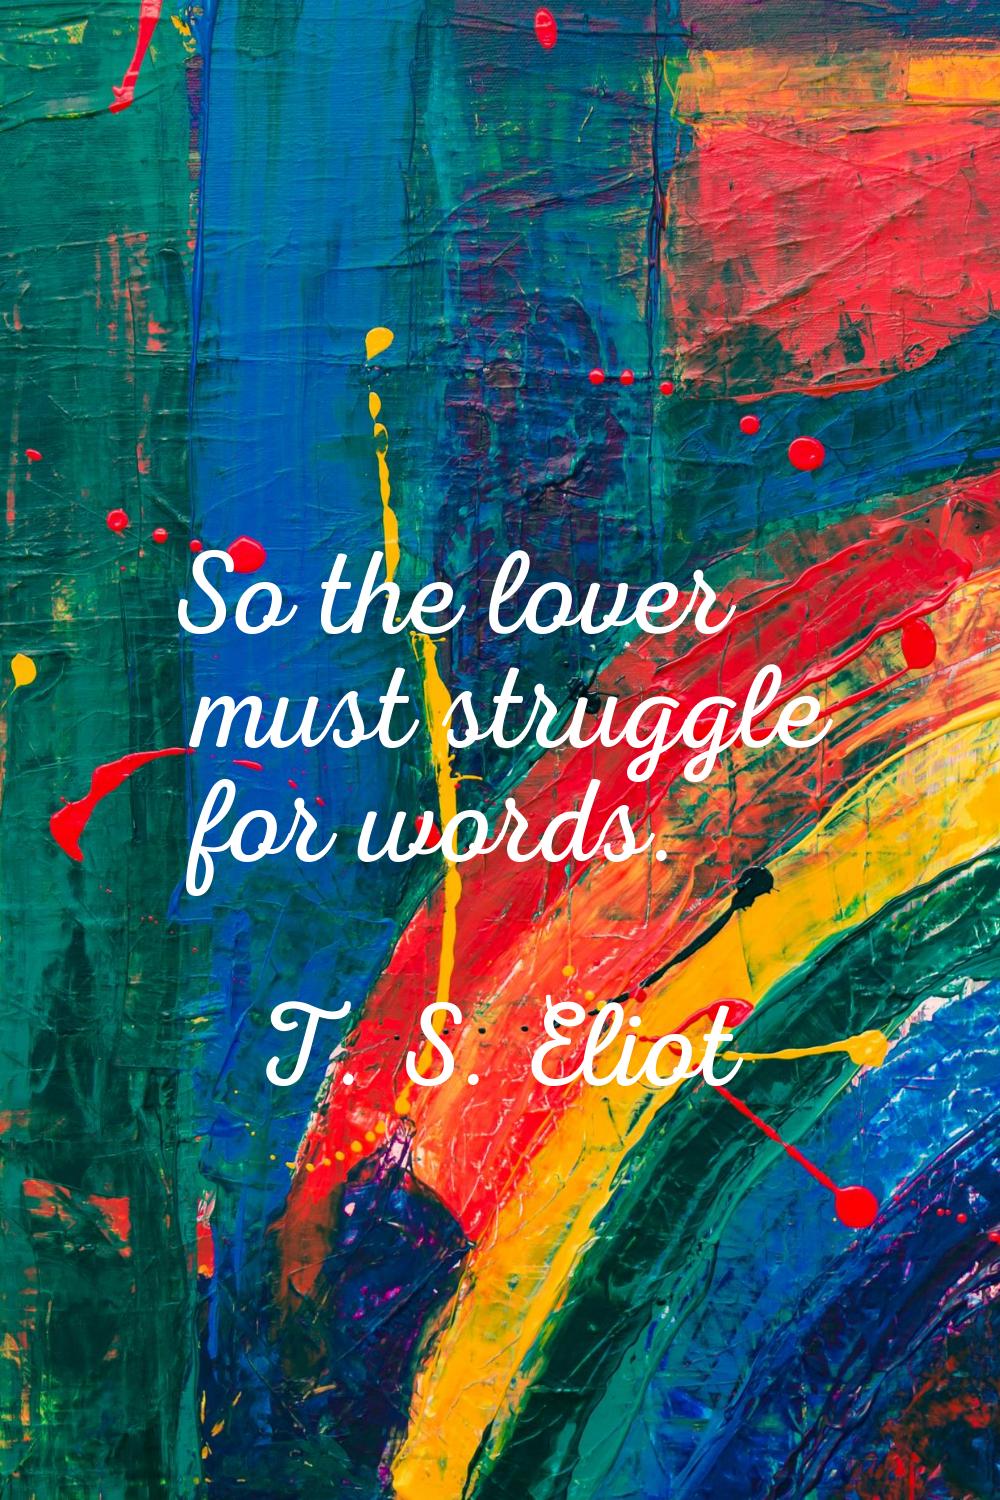 So the lover must struggle for words.